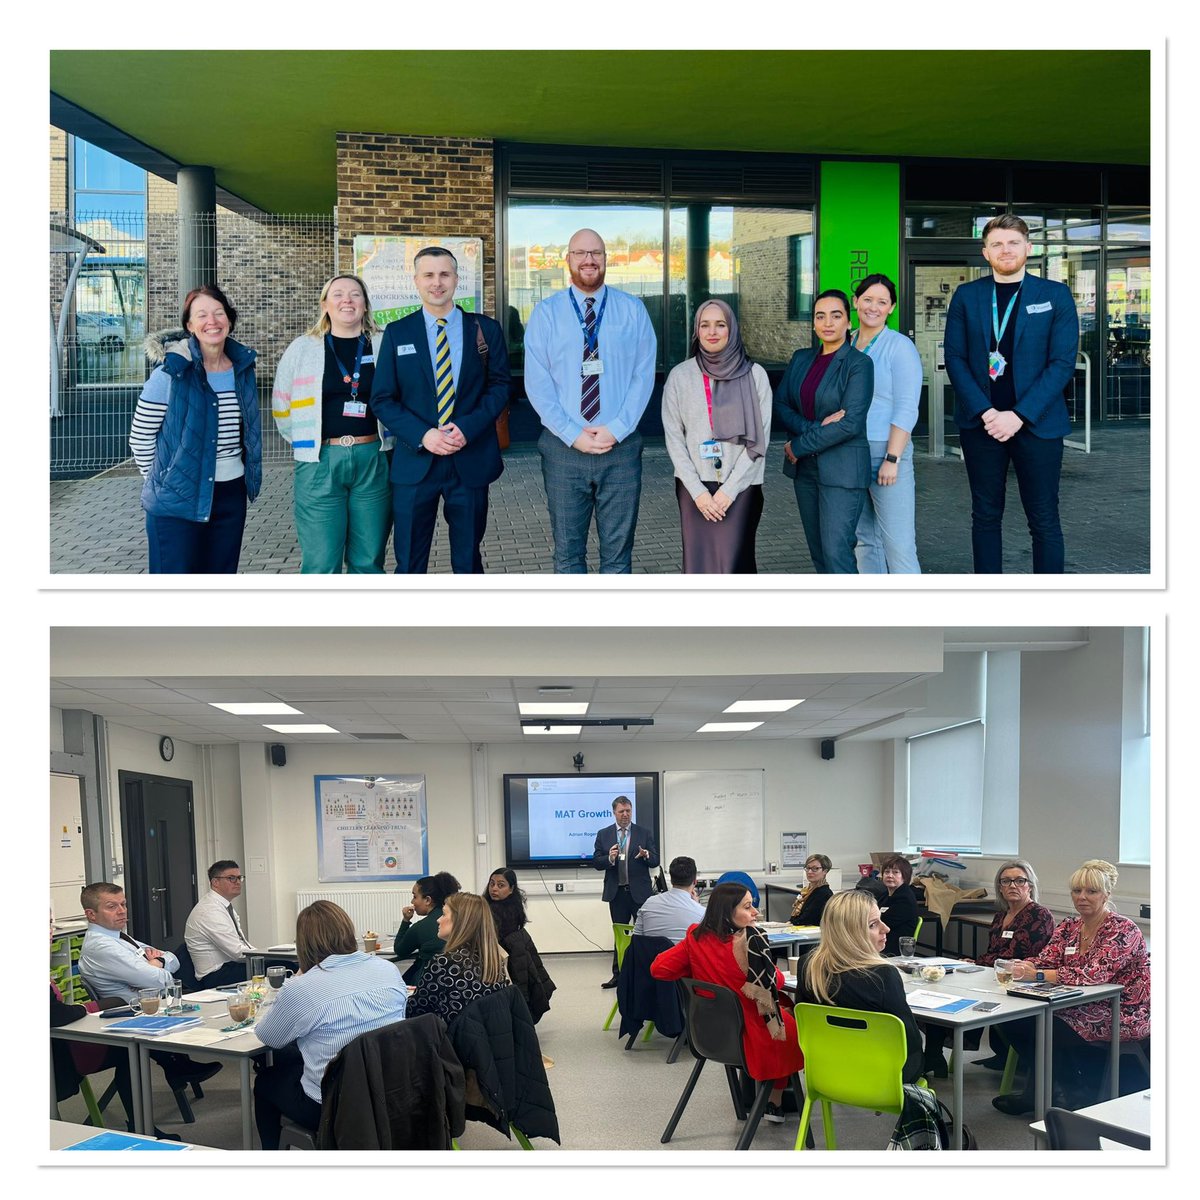 The last two Fridays @ChilternA has hosted over thirty visitors from schools and MAT’s from all over the country. It’s been a pleasure to showcase our wonderful school as well as learn so much from others experiences @ChilternLT @ChilternTSH @unleashing_me